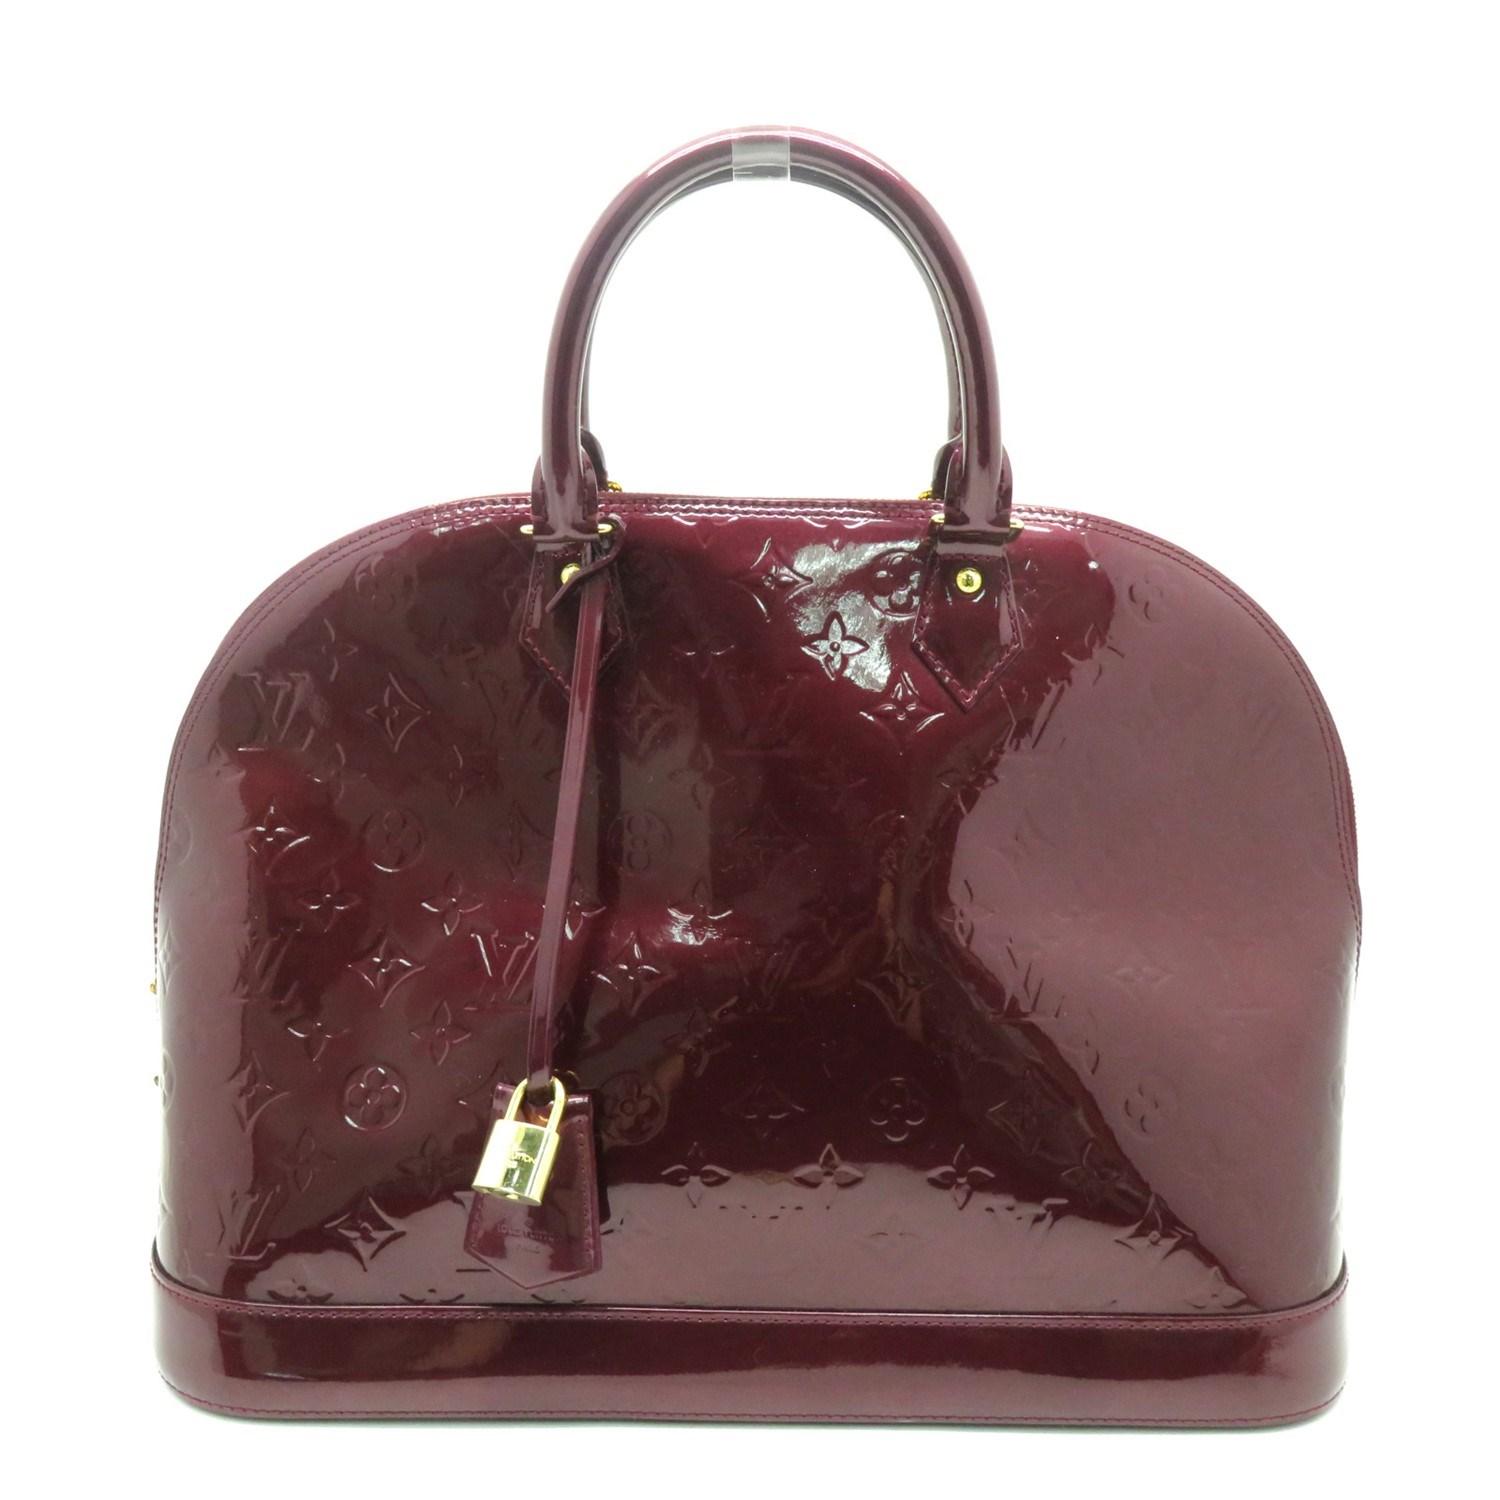 Louis Vuitton Lv Alma Gm Tote Bag Shopper M93595 Vernis Wine Red 3186 in Red - Lyst